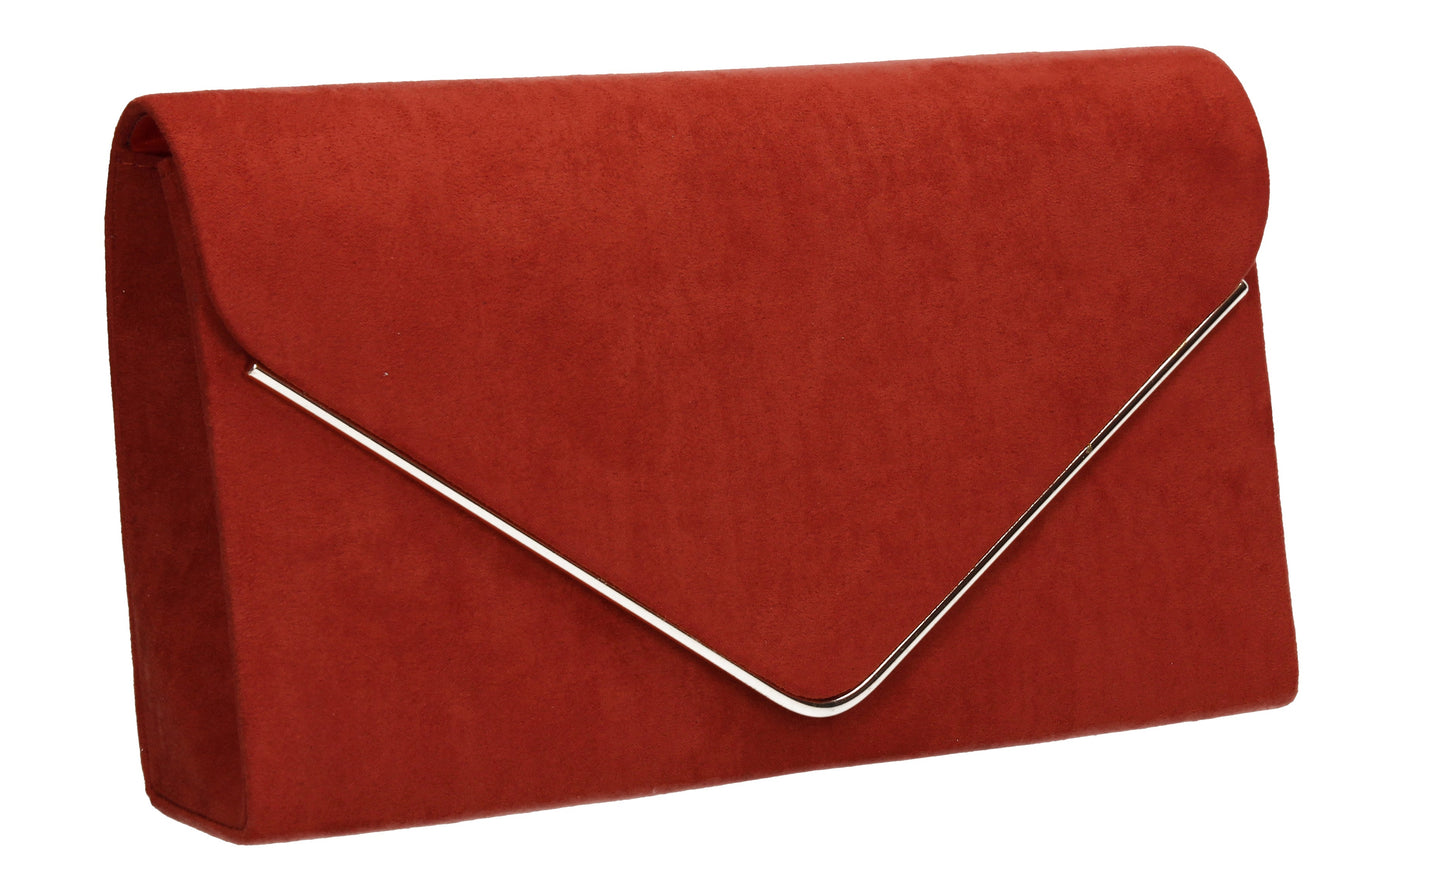 Poppy Faux Suede Envelope Clutch Bag Rust Red